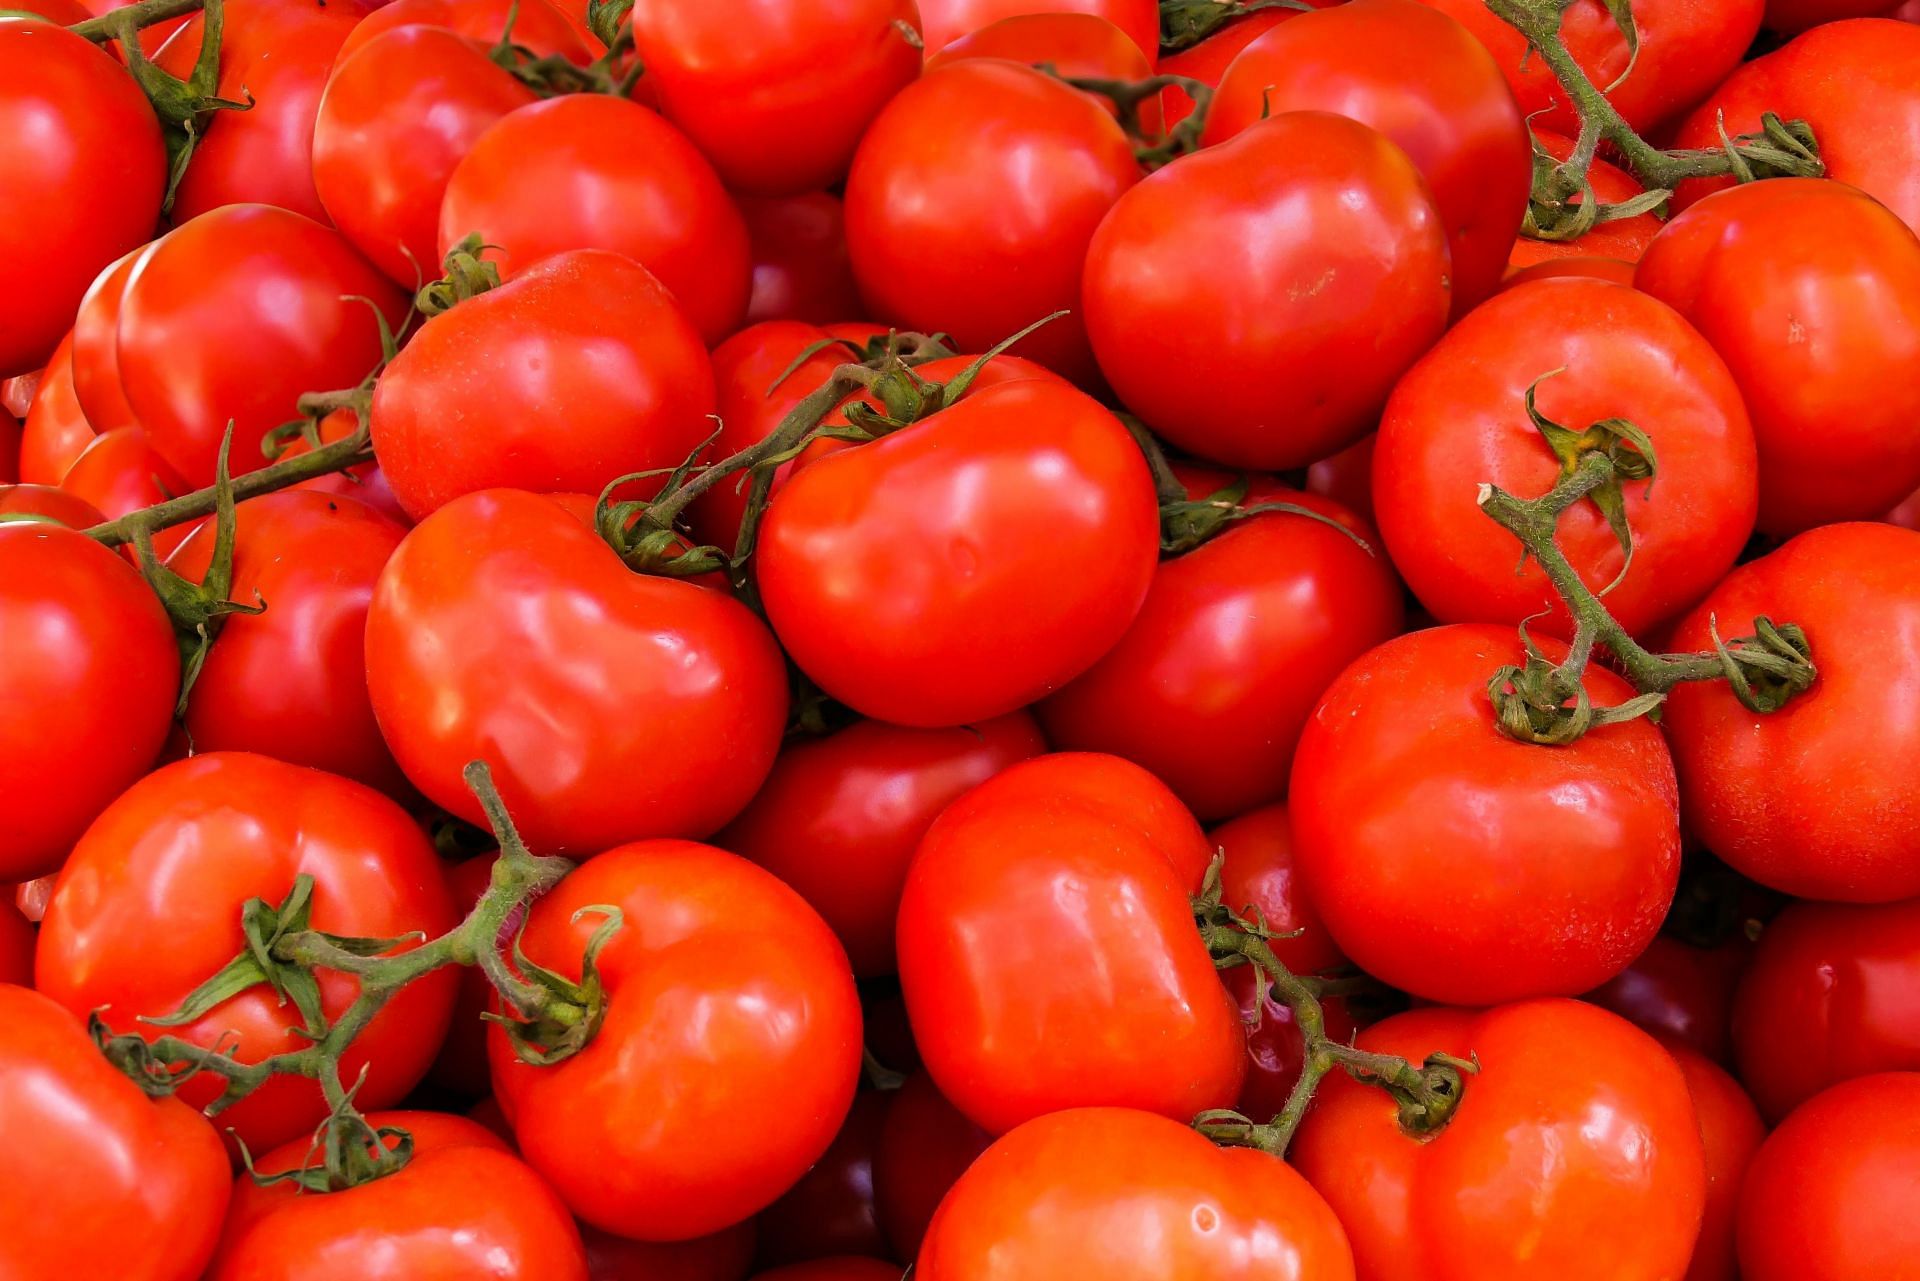 Tomatoes as one of the best fat burning fruits (image sourced via Pexels / Photo by Pixabay)